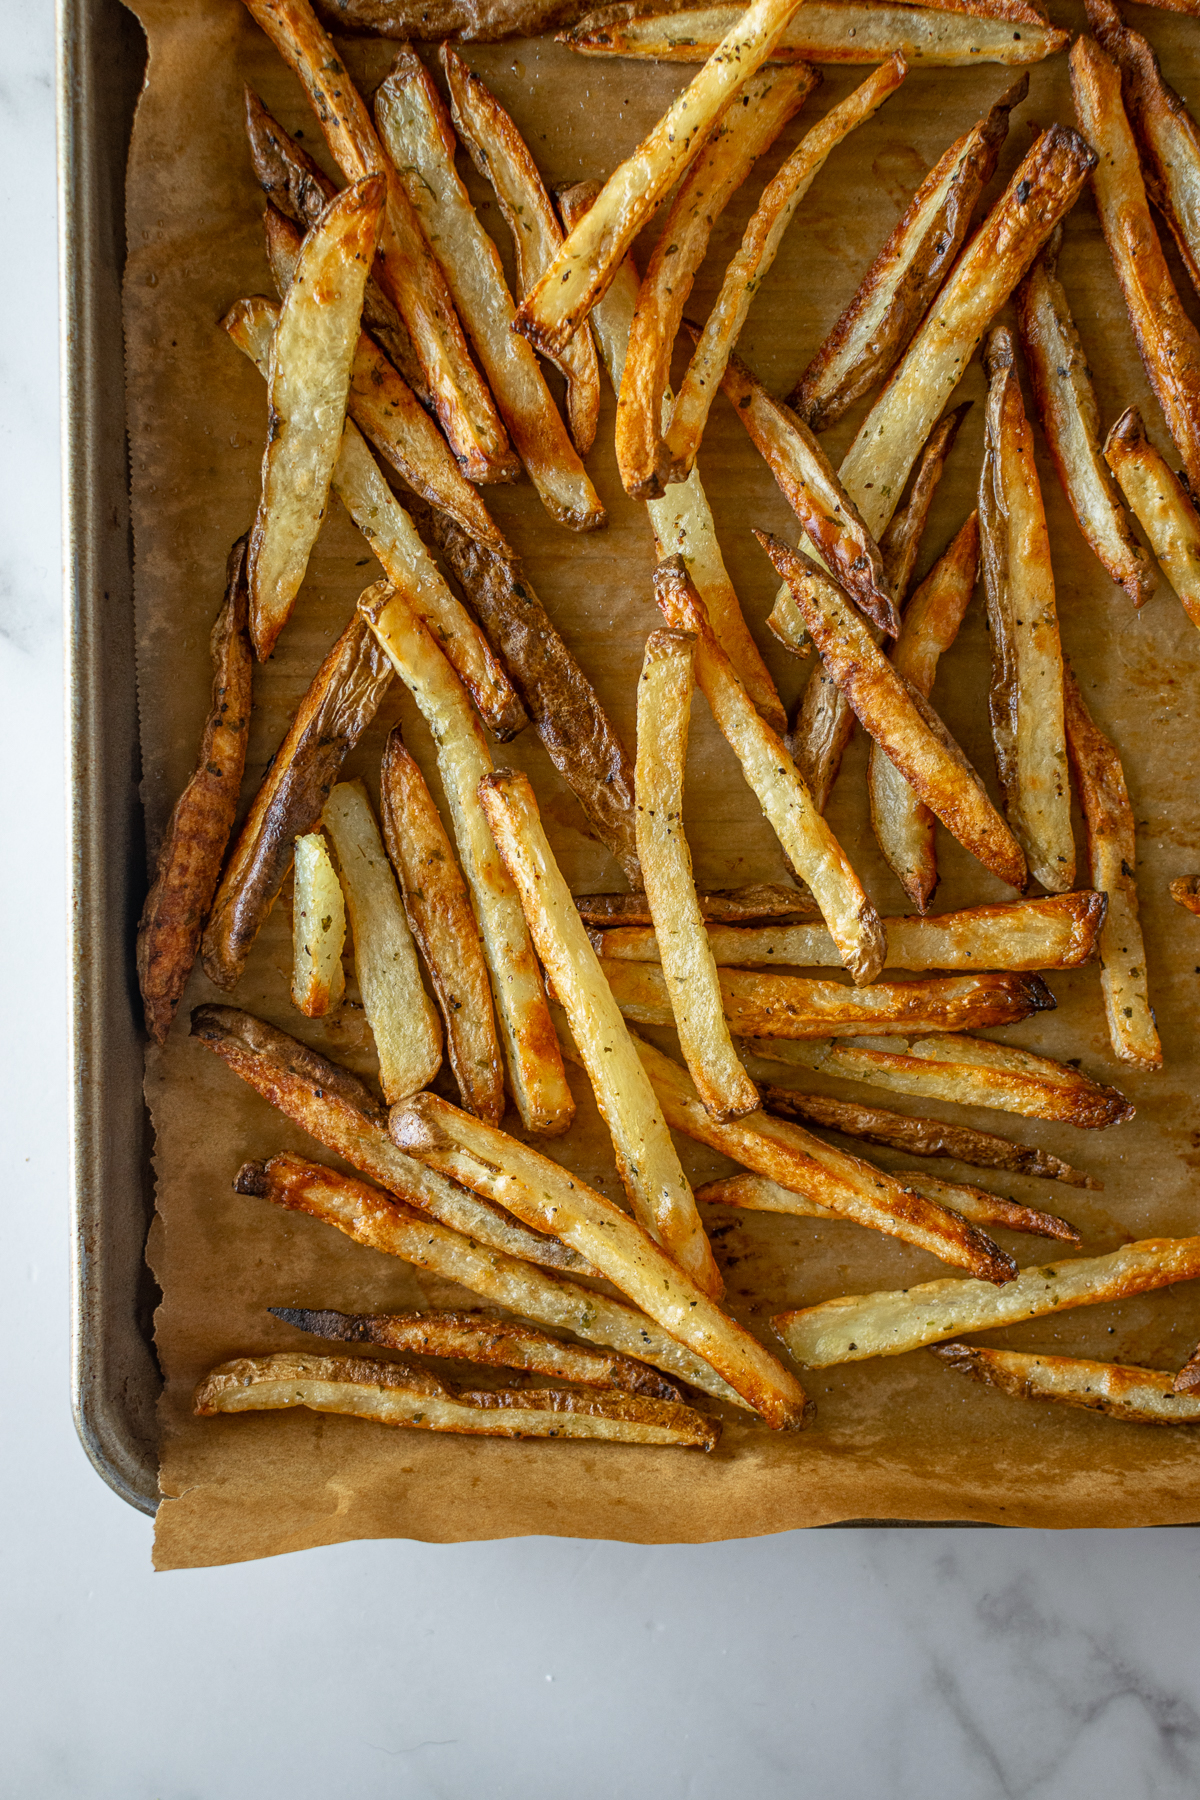 baked french fries on a baking sheet with parchment paper.